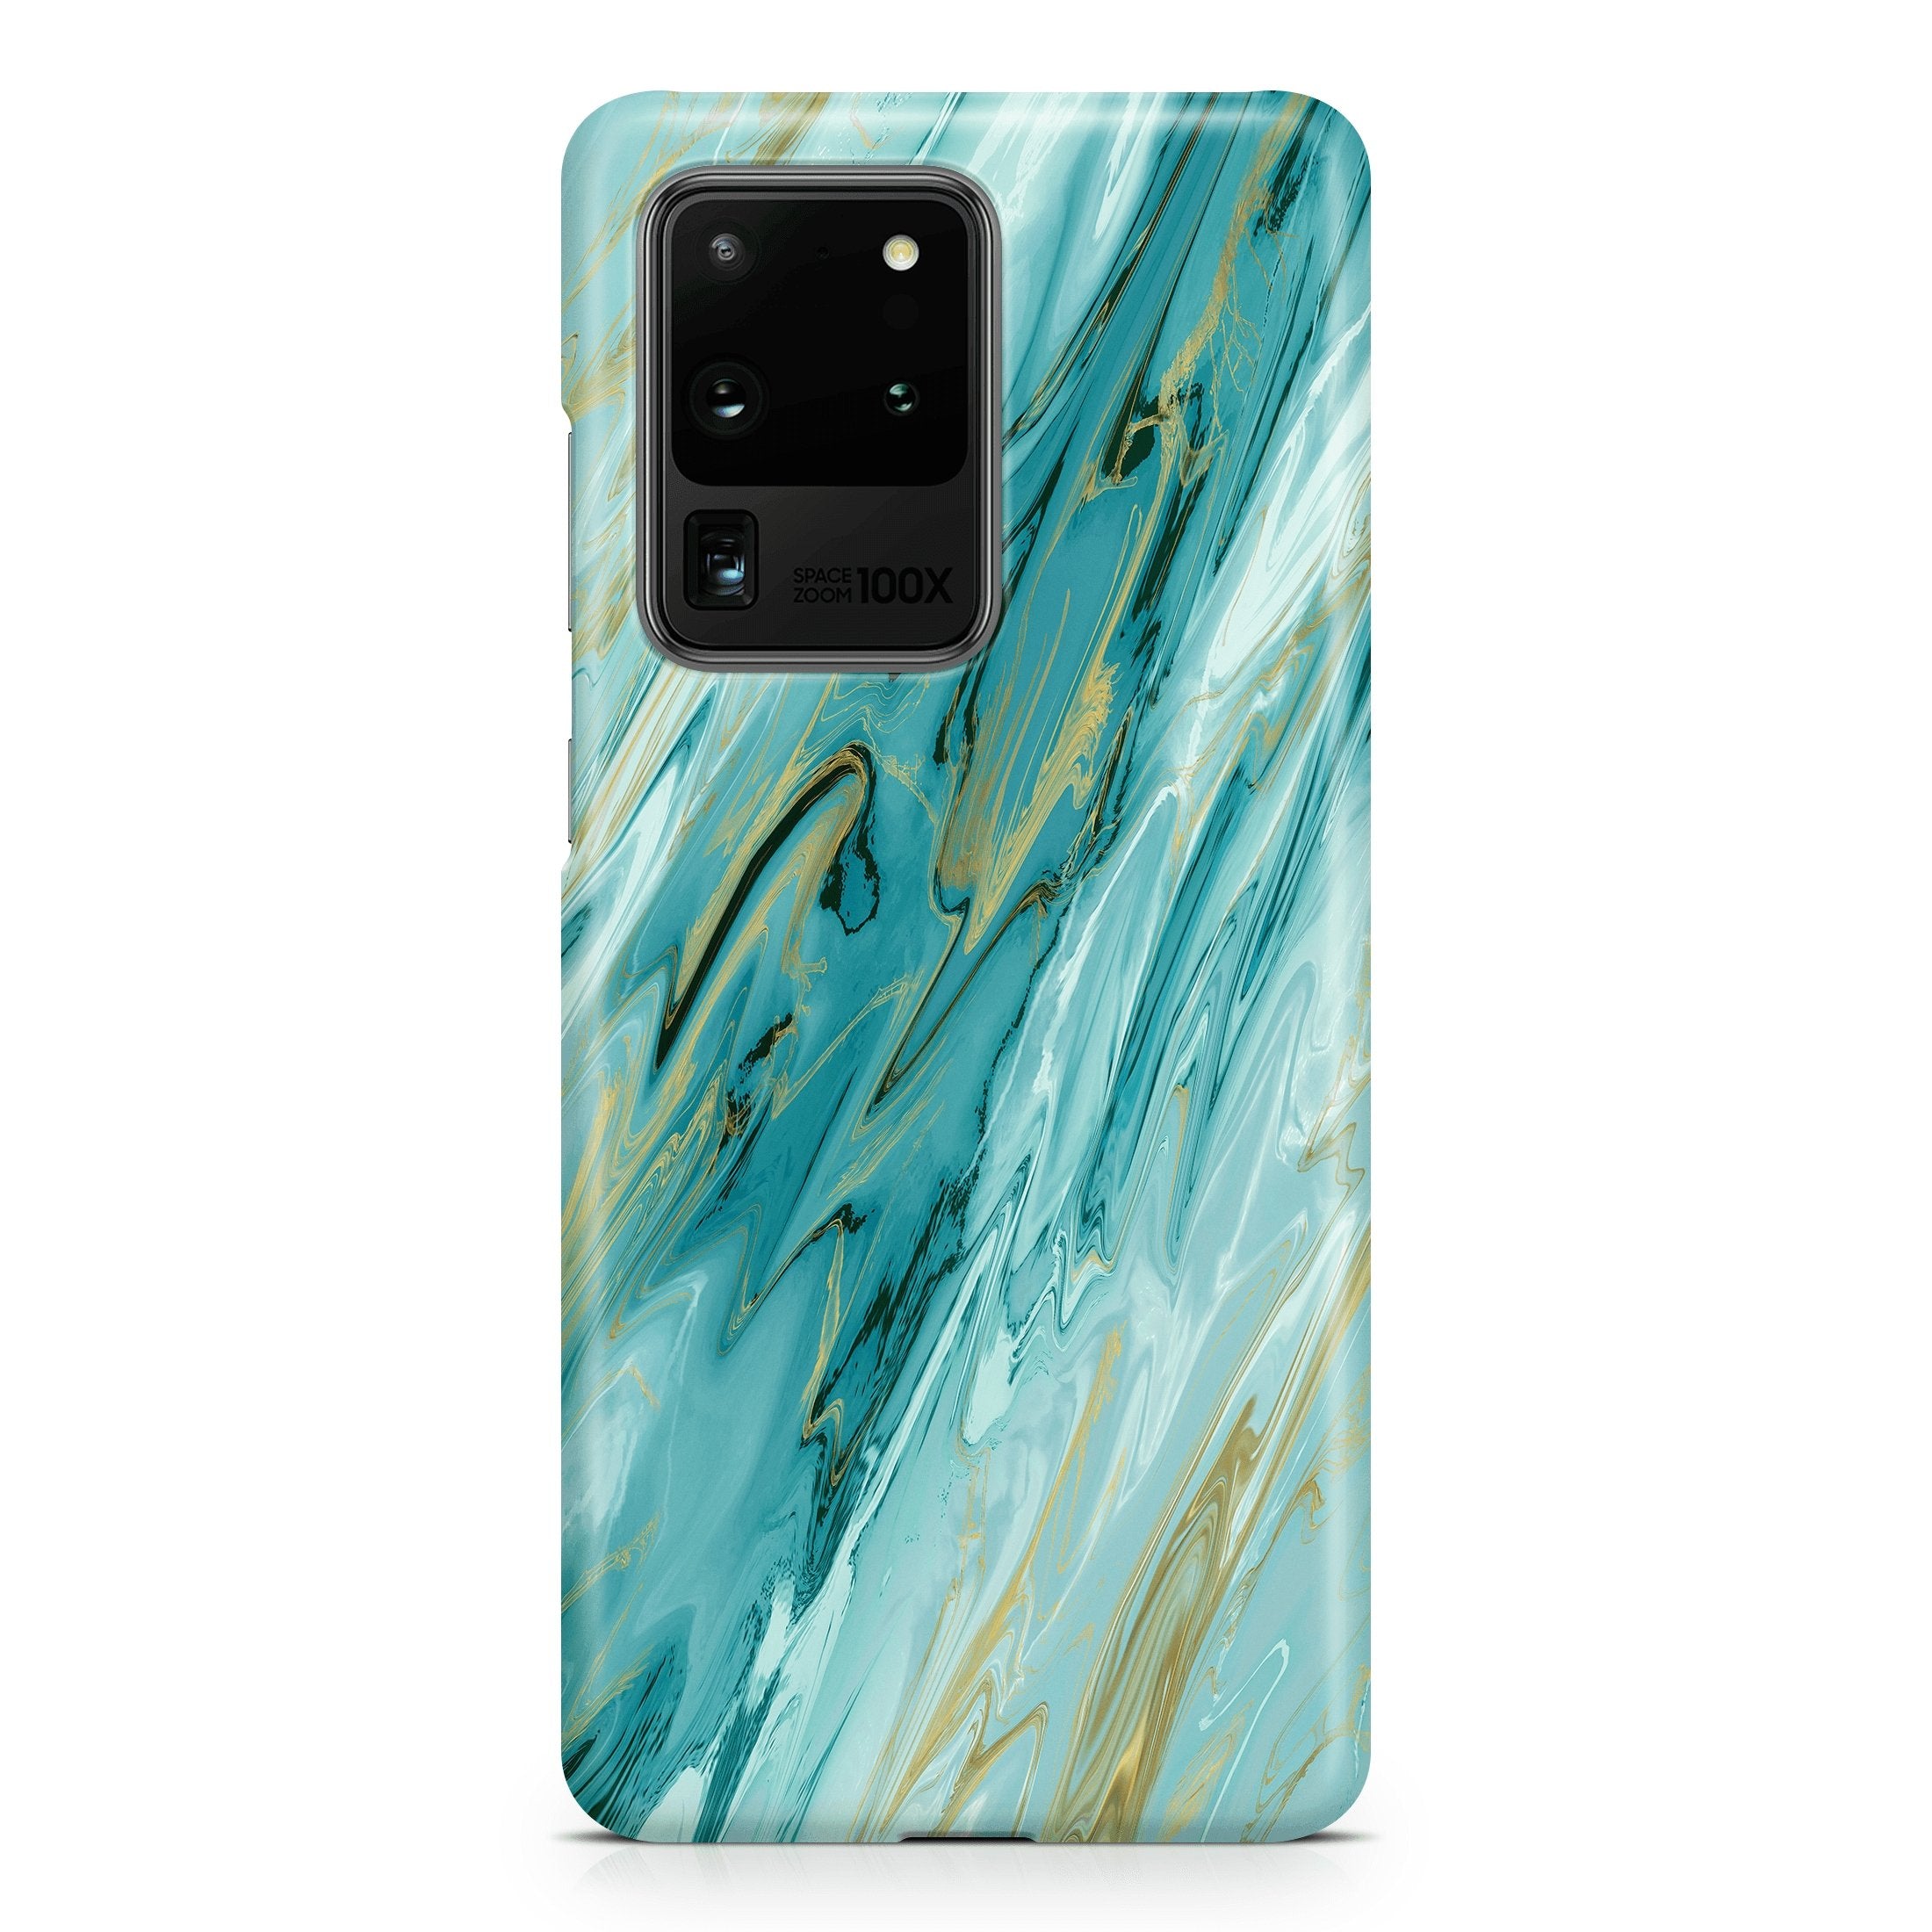 Turquoise & Gold Agate - Samsung phone case designs by CaseSwagger